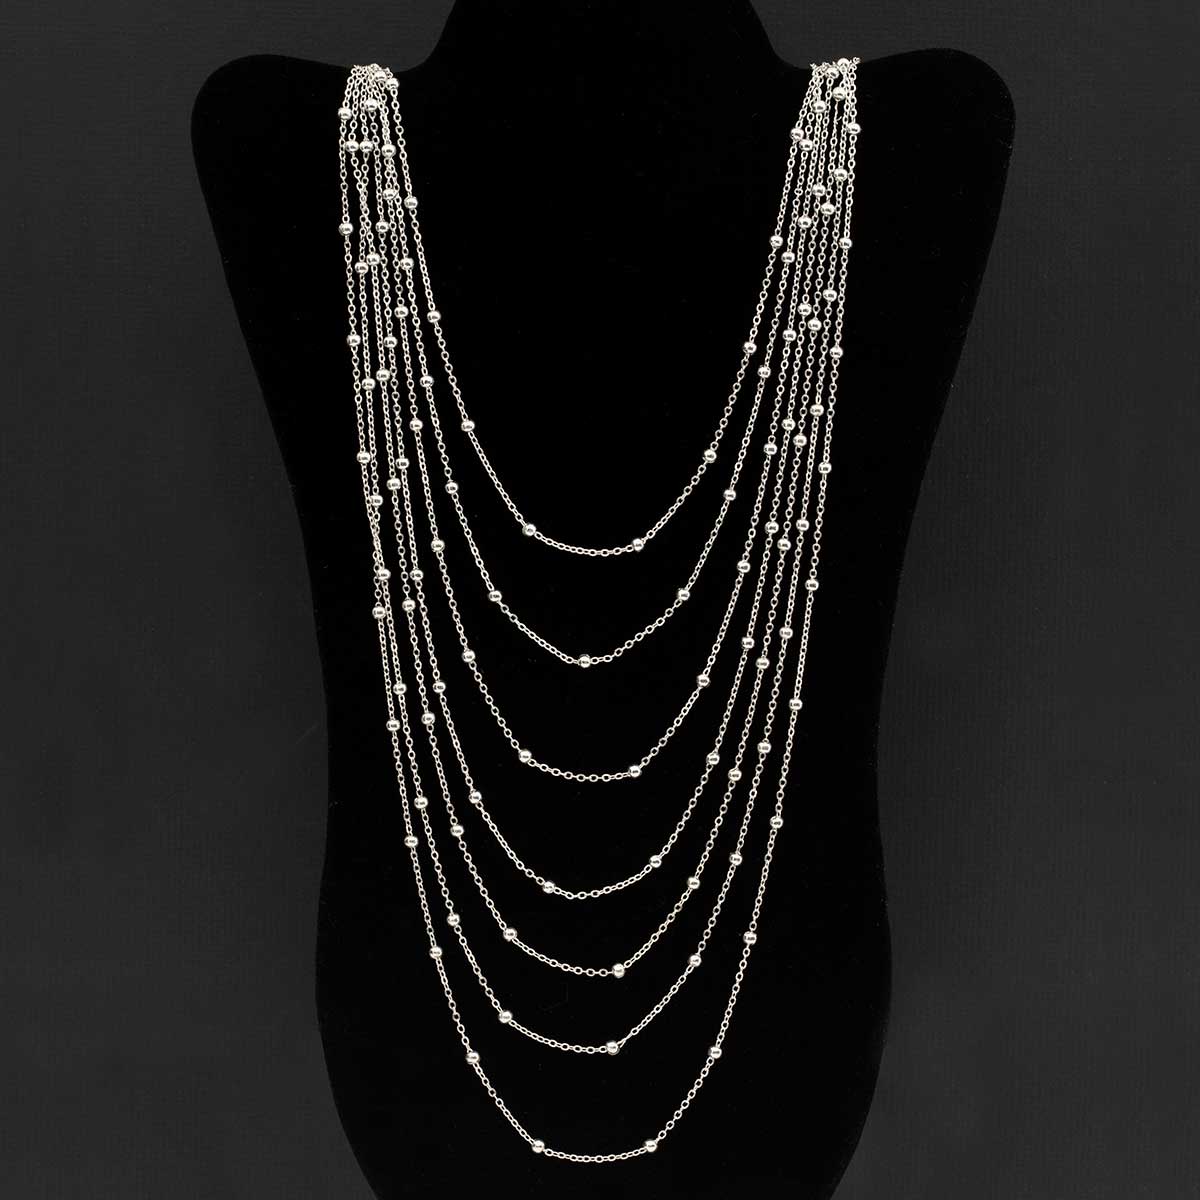 Silver Multi Strand Necklace with Mini Beads on Chain 24"-27"